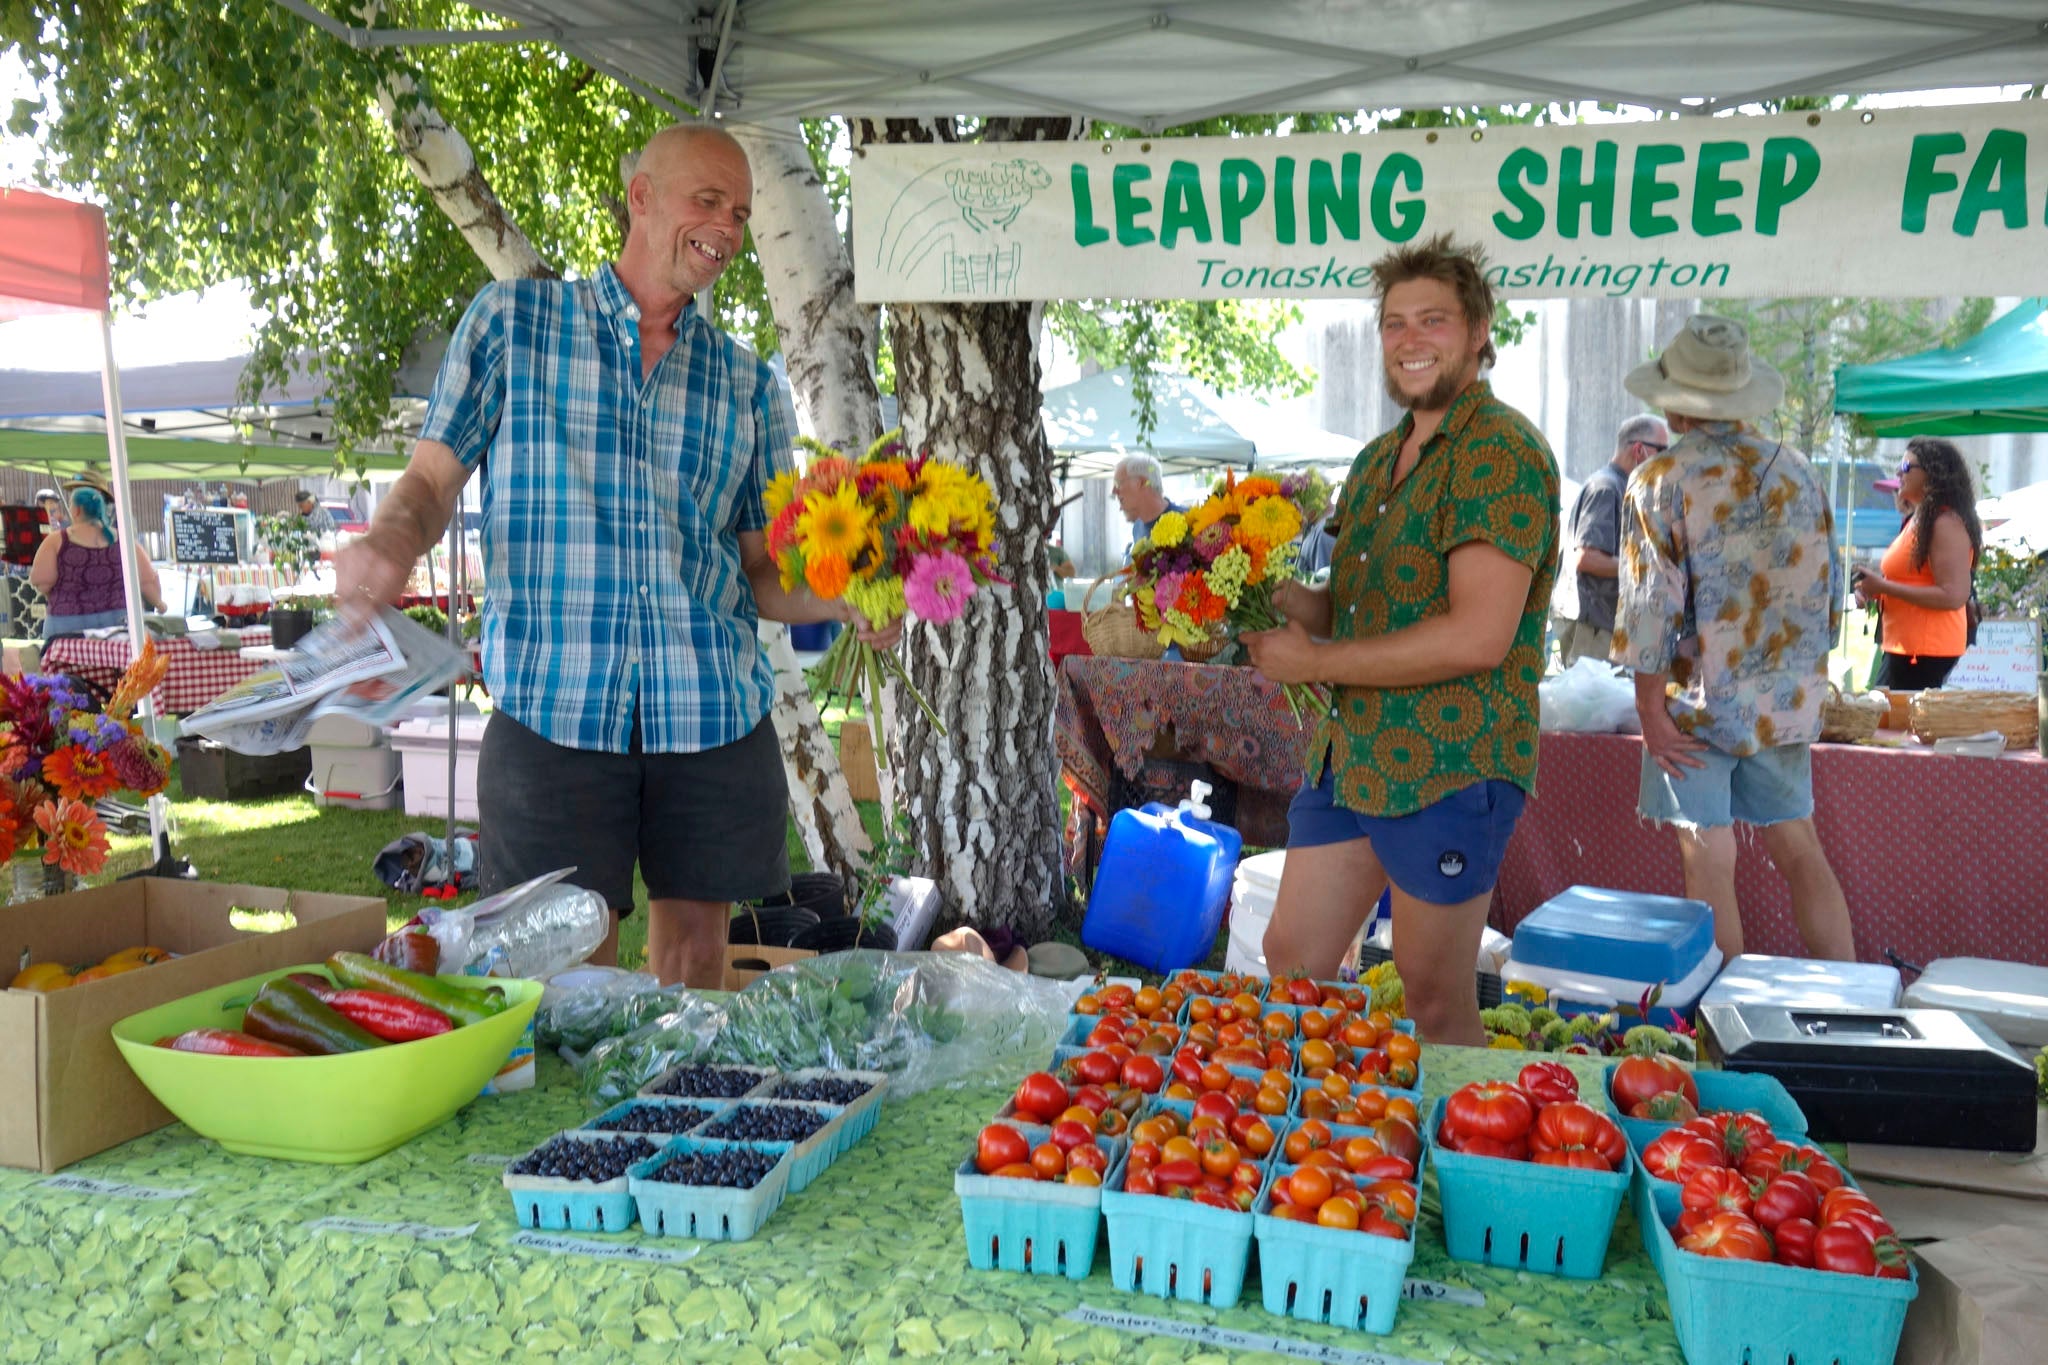 Ton and Bodie of Leaping Sheep Farm at the Tonasket Farmers Market